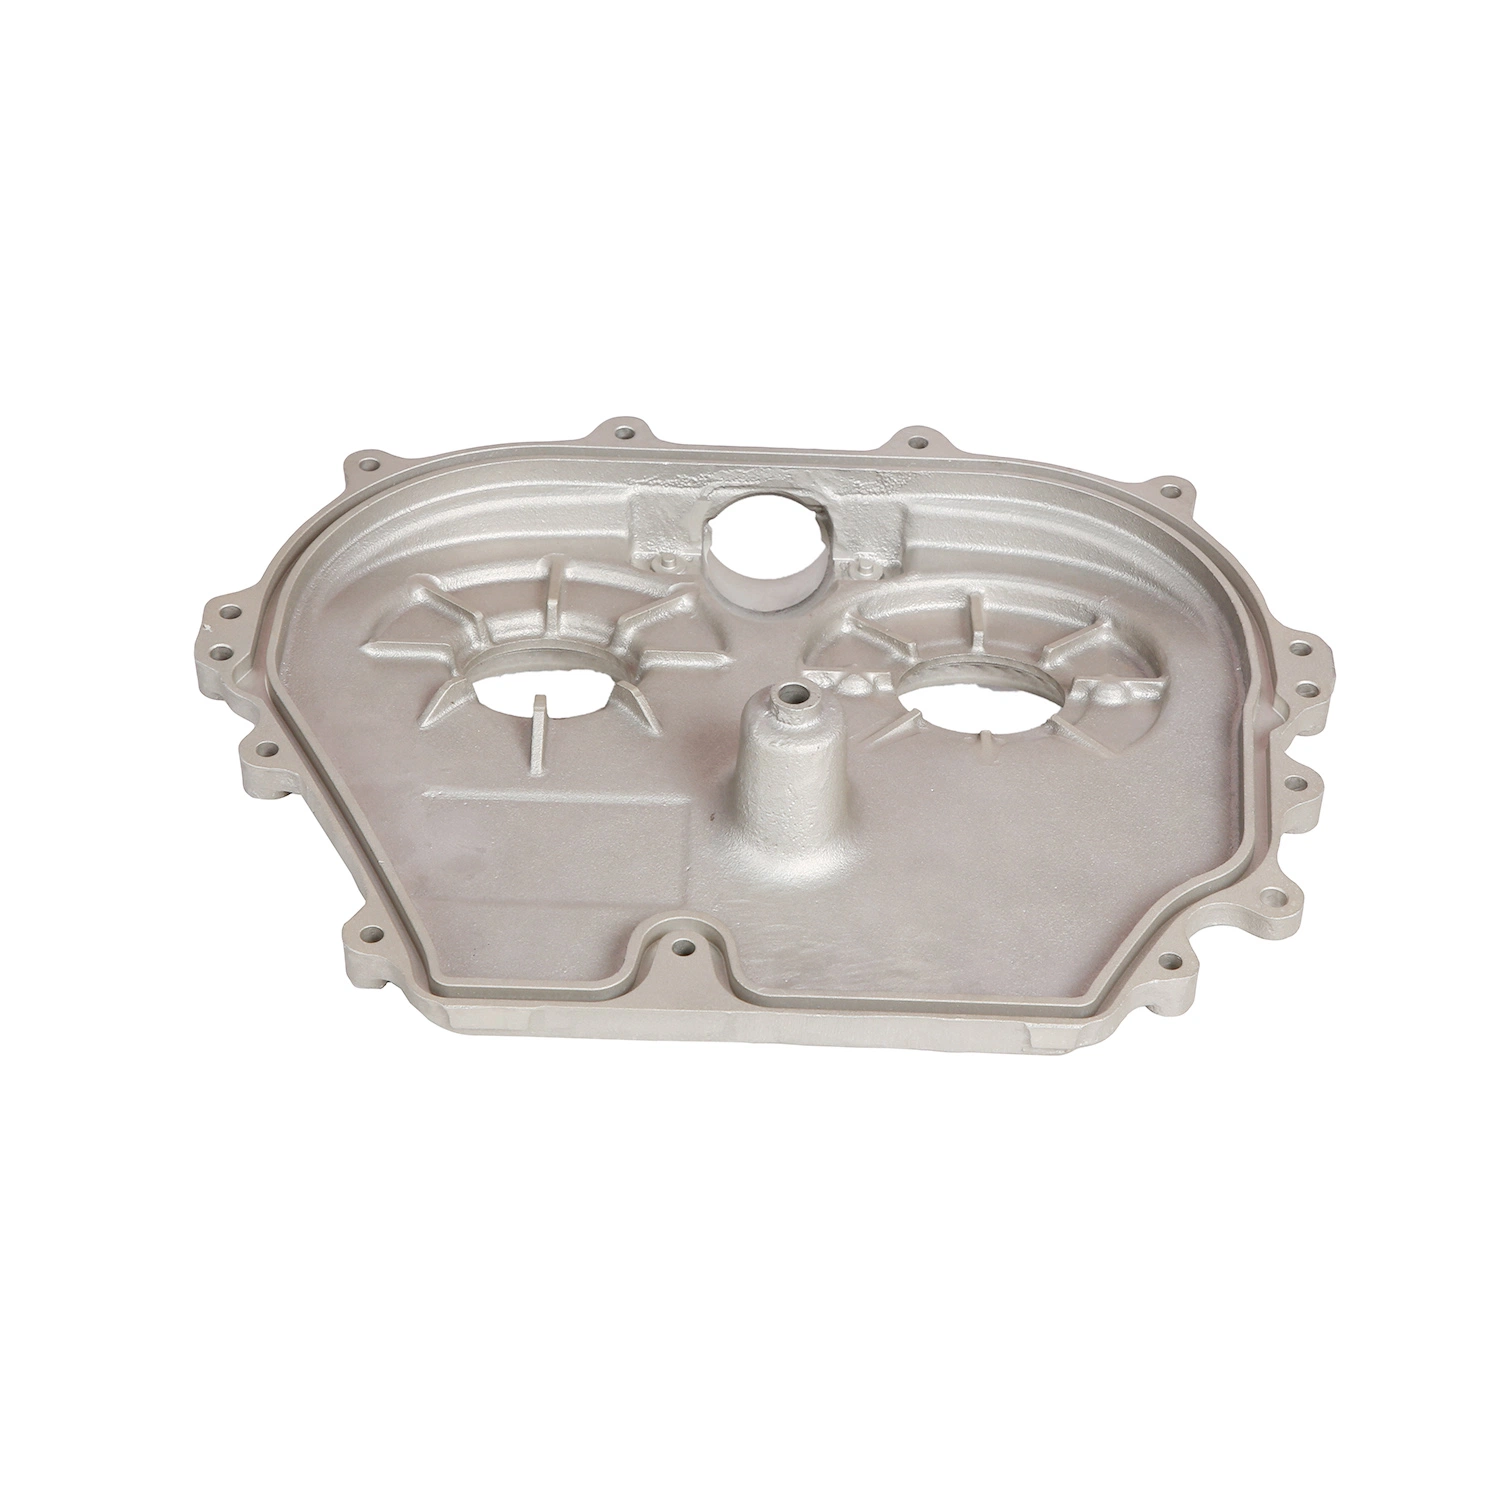 Motor Parts Motor Housing CNC Machining Machine Parts OEM Customized Auto Spare Engine Gearbox Part Rapid by 3D Printing Sand Casting Part